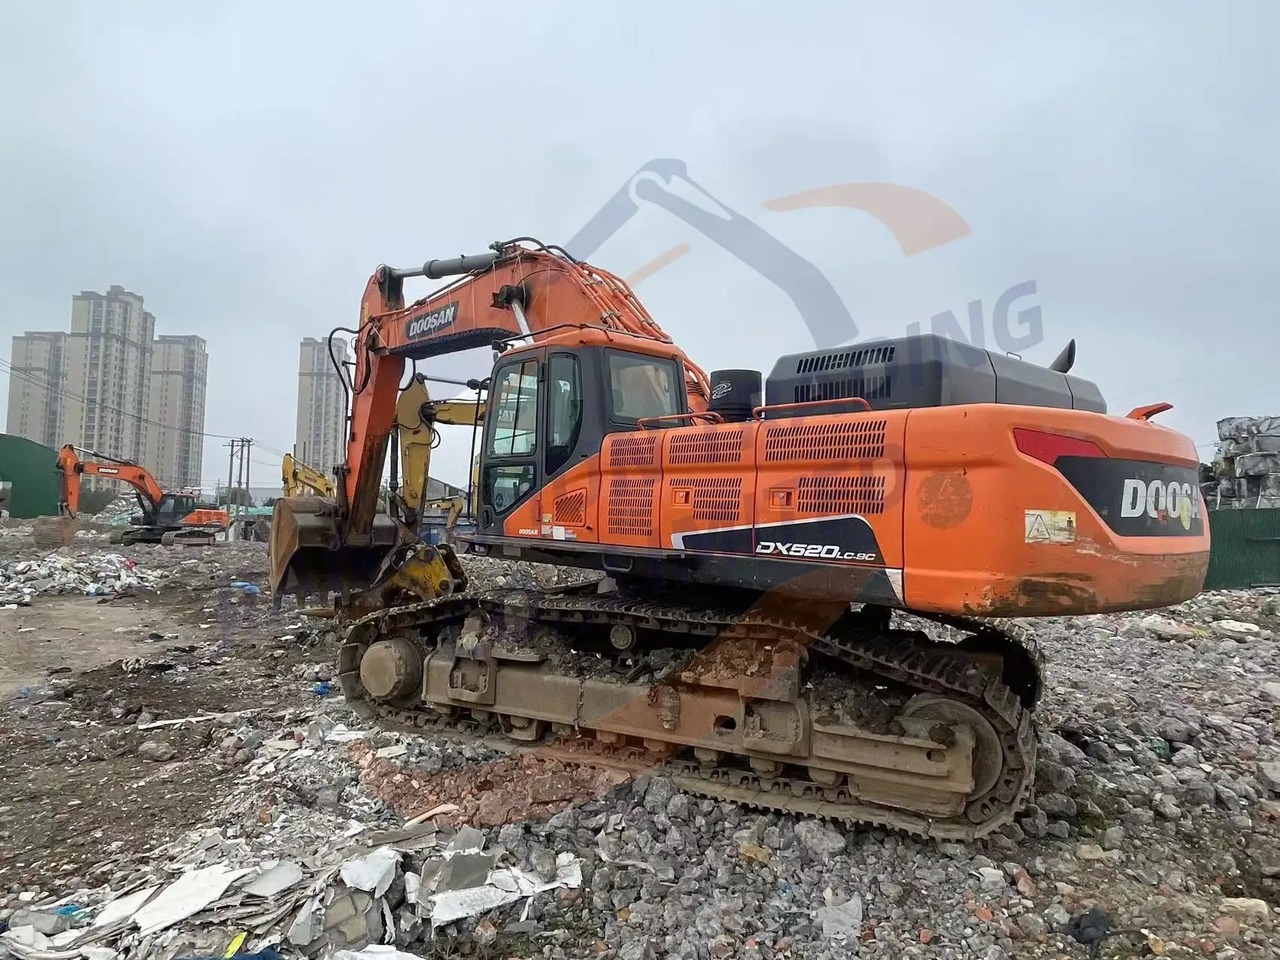 Pelle sur chenille new arrival Used Doosan excavator DX520LC-9C in good condition for sale in good condition: photos 2